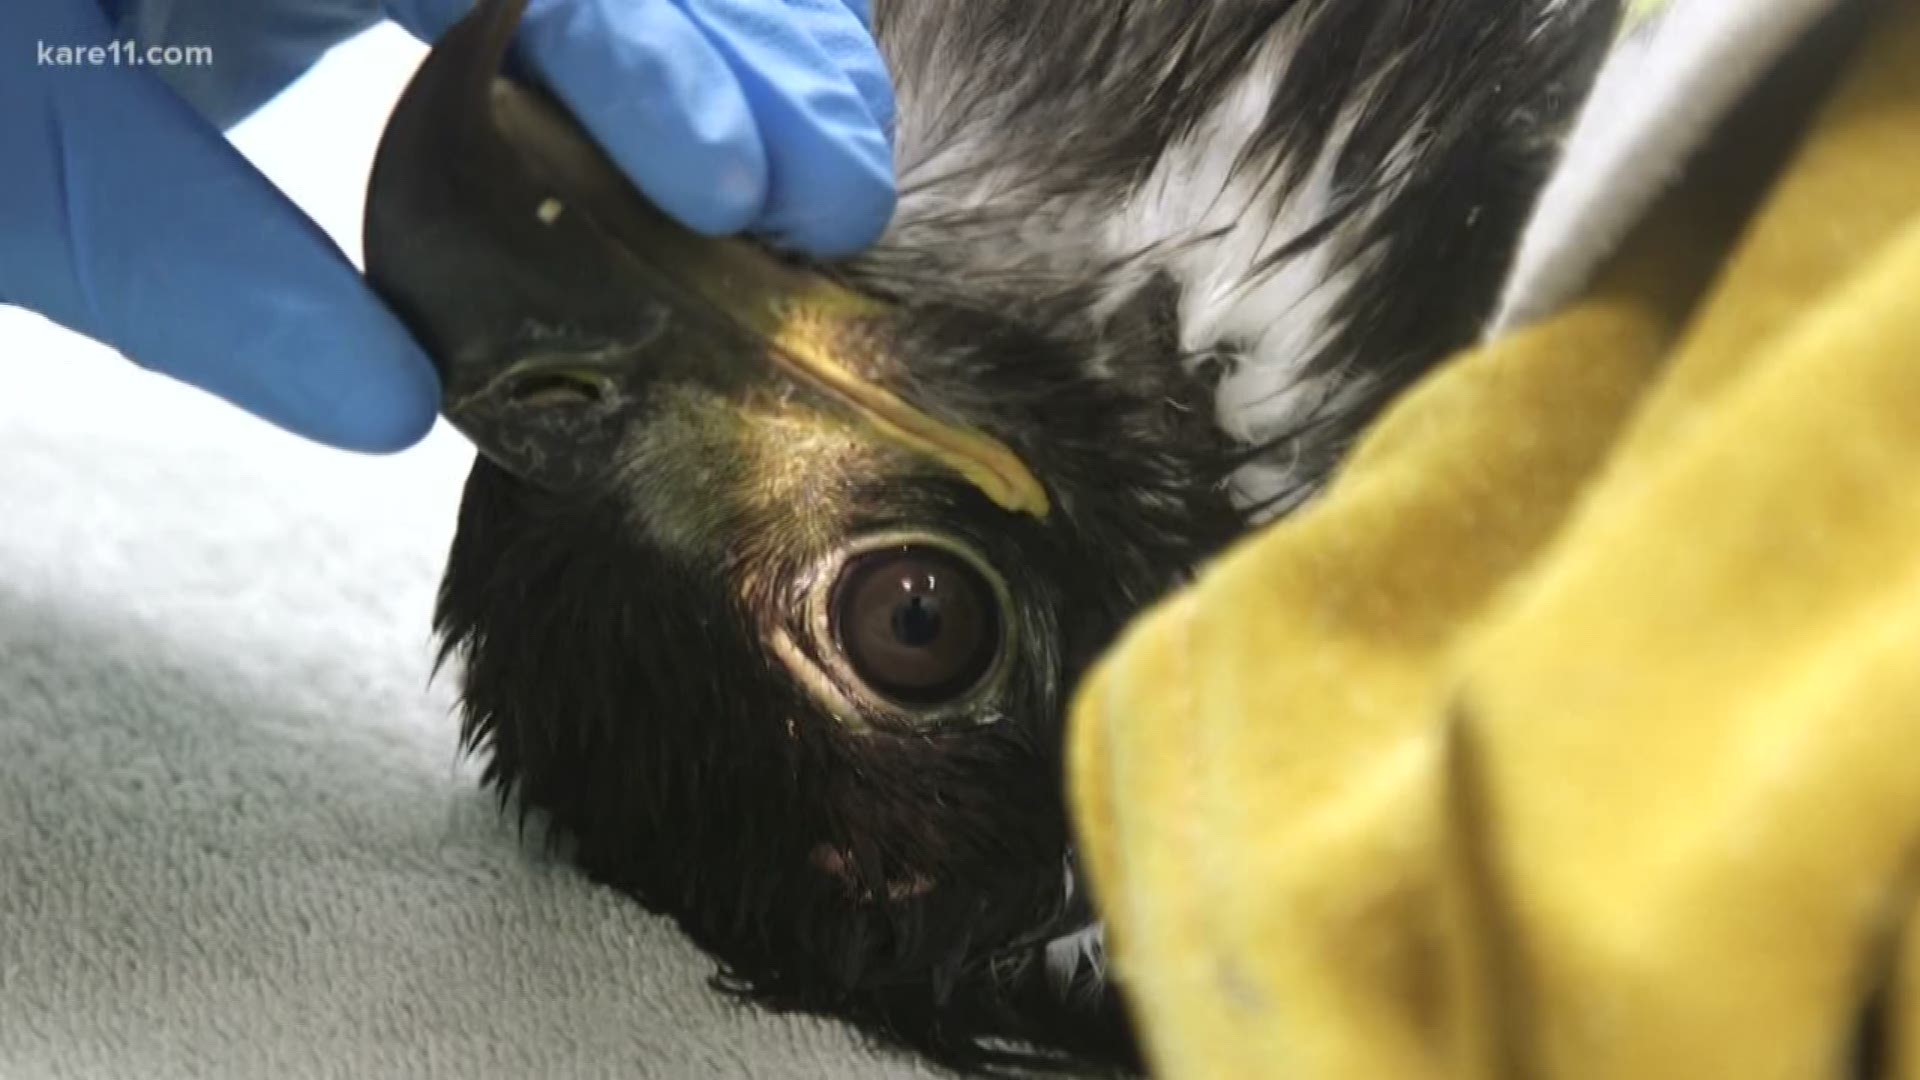 A record number of eaglets have been admitted to The Raptor Center this year. We got a look at the journey toward rehabilitation. https://kare11.tv/2Kn6po0